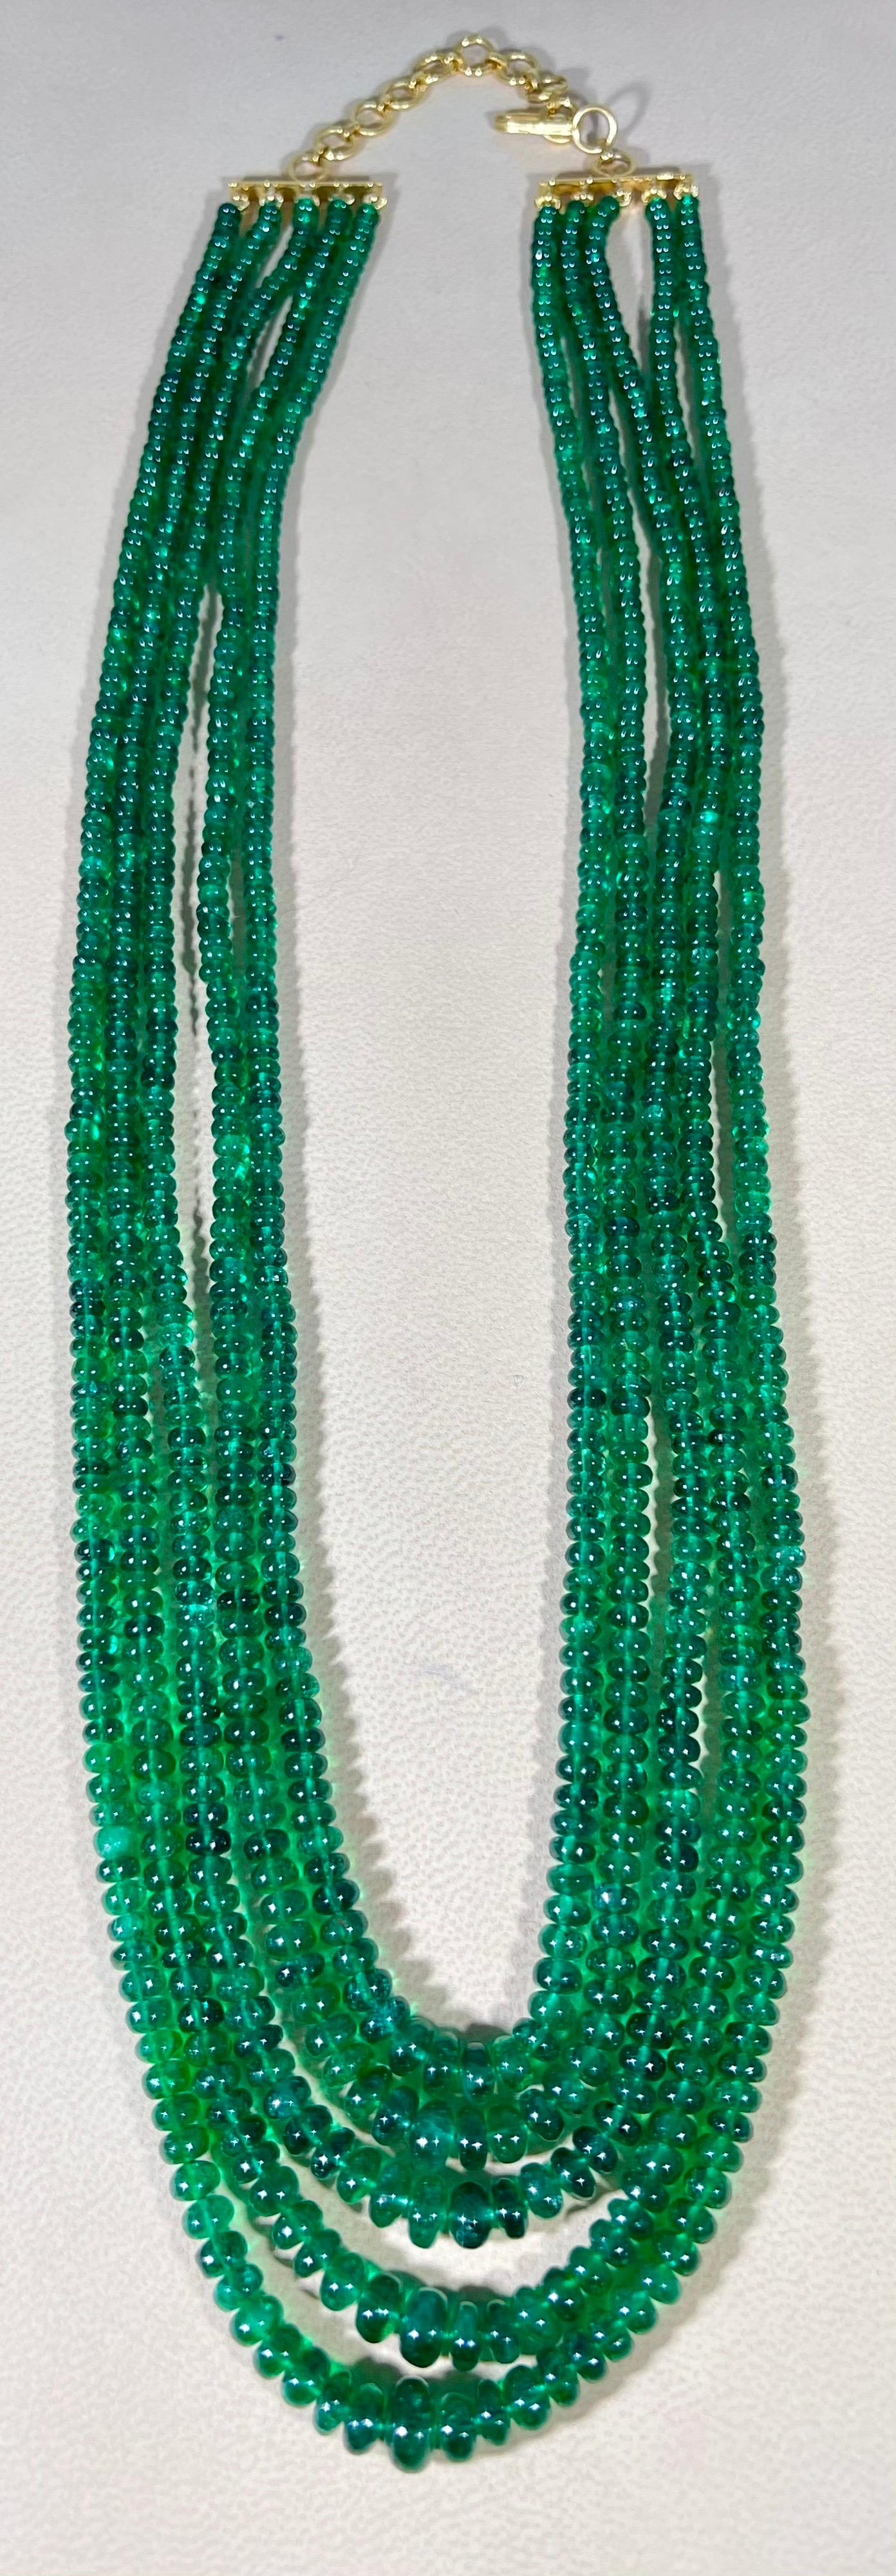 300ct Fine Emerald Beads 5 Line Necklace with 14 kt Yellow Gold Clasp Adjustable For Sale 9